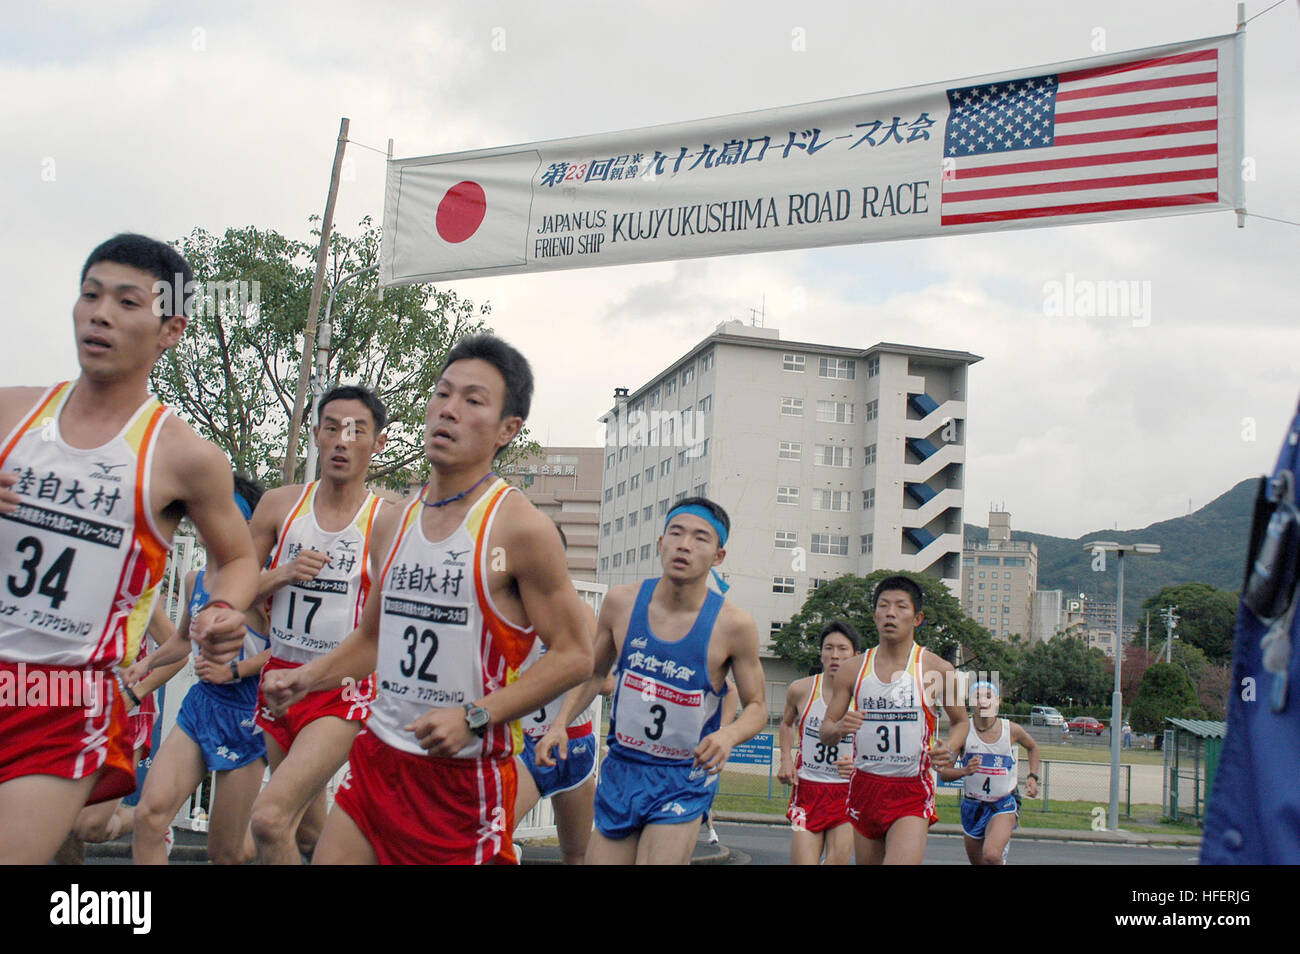 031130-N-7217H-002 U.S. Fleet Activities Sasebo, Japan  (November 30, 2003) - More than 560 runners participated in the 23rd annual Japan-U.S Friendship Kujyukushima Road Race at Nimitz Park at Fleet Activities Sasebo, Japan; runners consisted of Japanese and SOFA-sponsored personnel. This event included 5 different age categories and various distances ranging from 2k - 10k events.       Official U.S. Navy Photograph by:  PH1(SW) Marvin Harris US Navy 031130-N-7217H-002 More than 560 runners participated in the 23rd annual Japan-U.S Friendship Kujyukushima Stock Photo